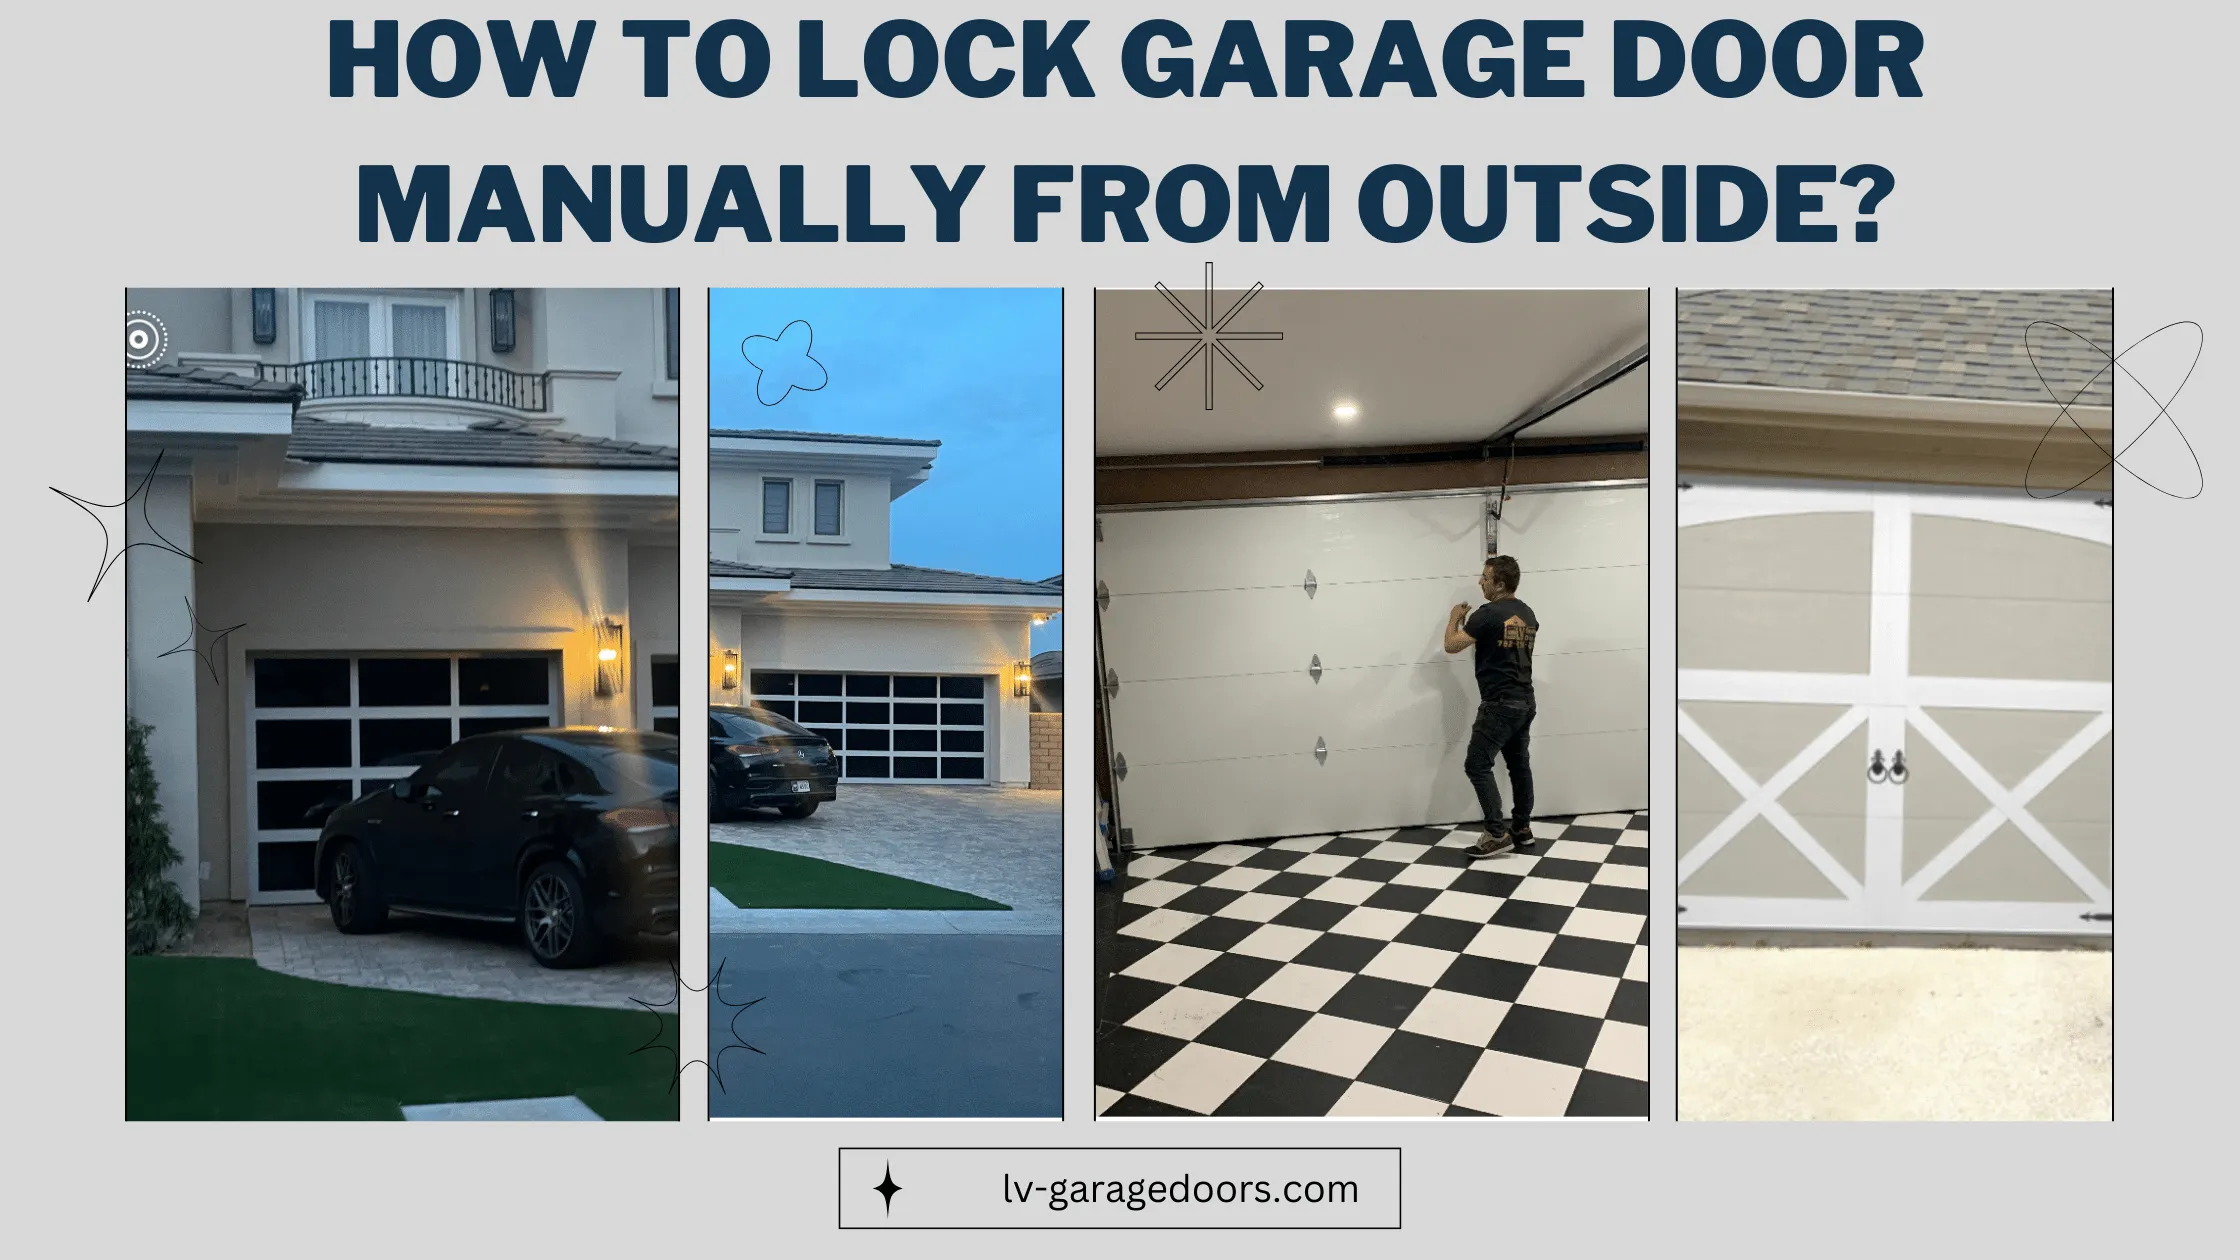 How To Lock Garage Door Manually From Outside